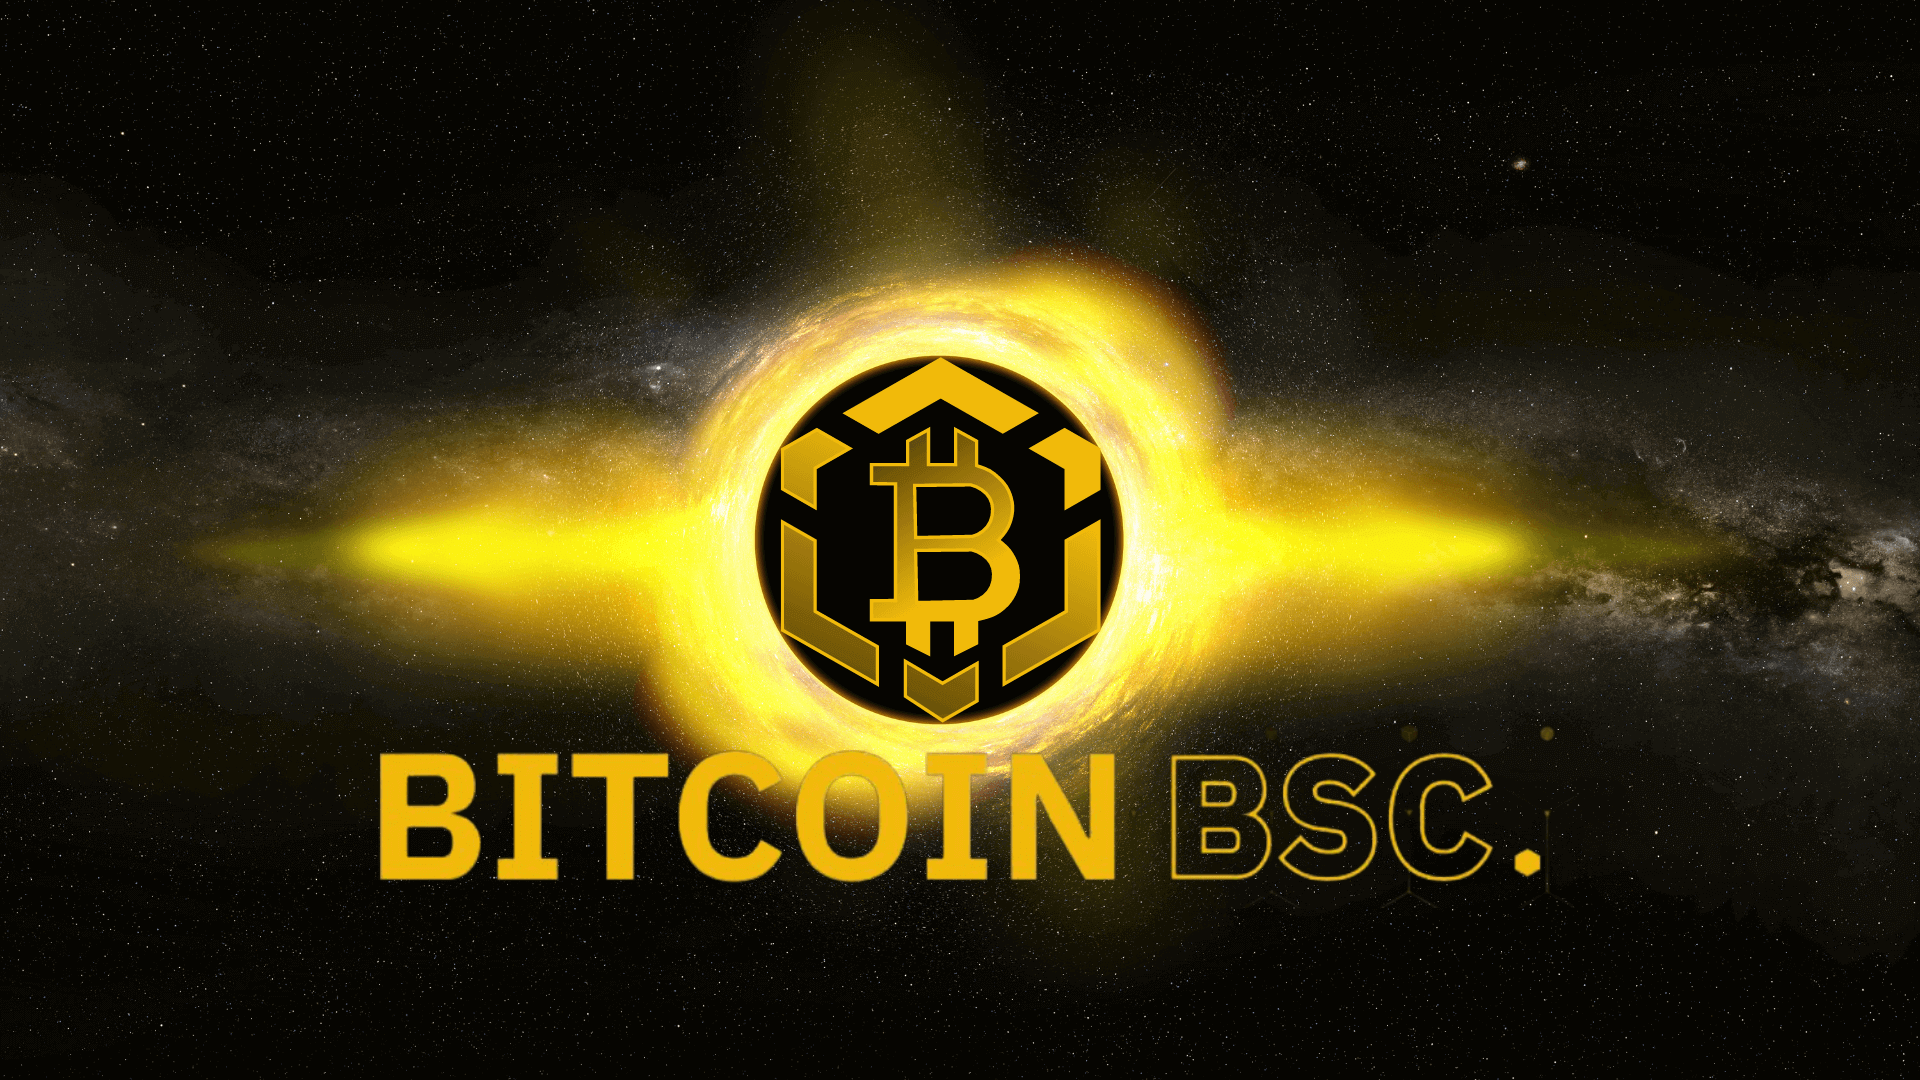 Can Bitcoin BSC Be The Next Bitcoin? BTCBSC Presale Launched, Raises  $250,000 In 72 Hours - Crypto Daily